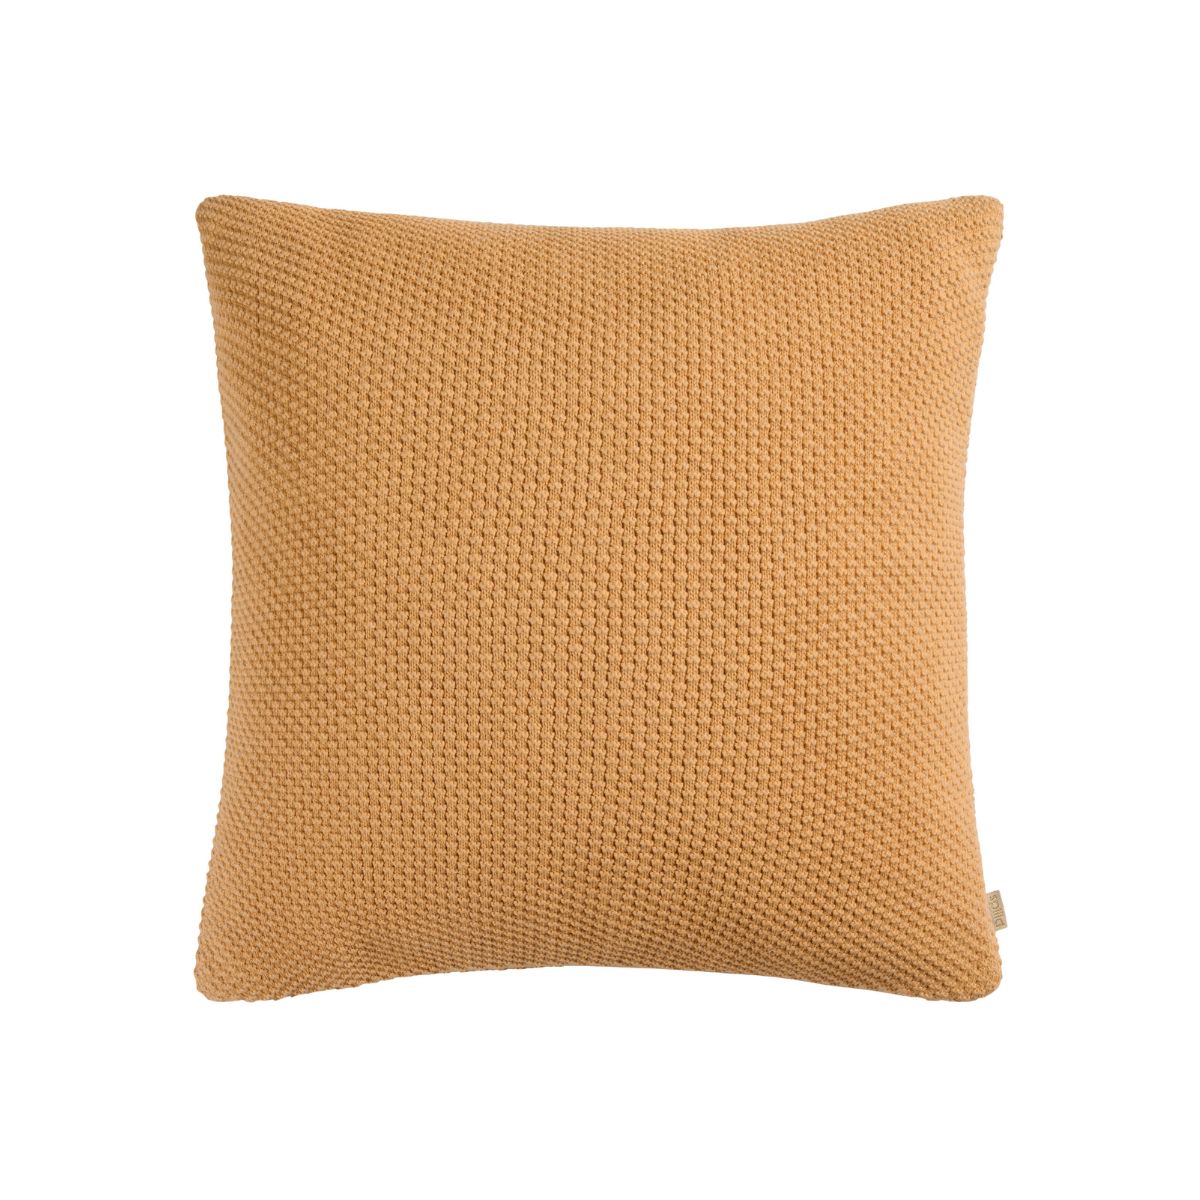 Nora - Coussin couleur moutarde